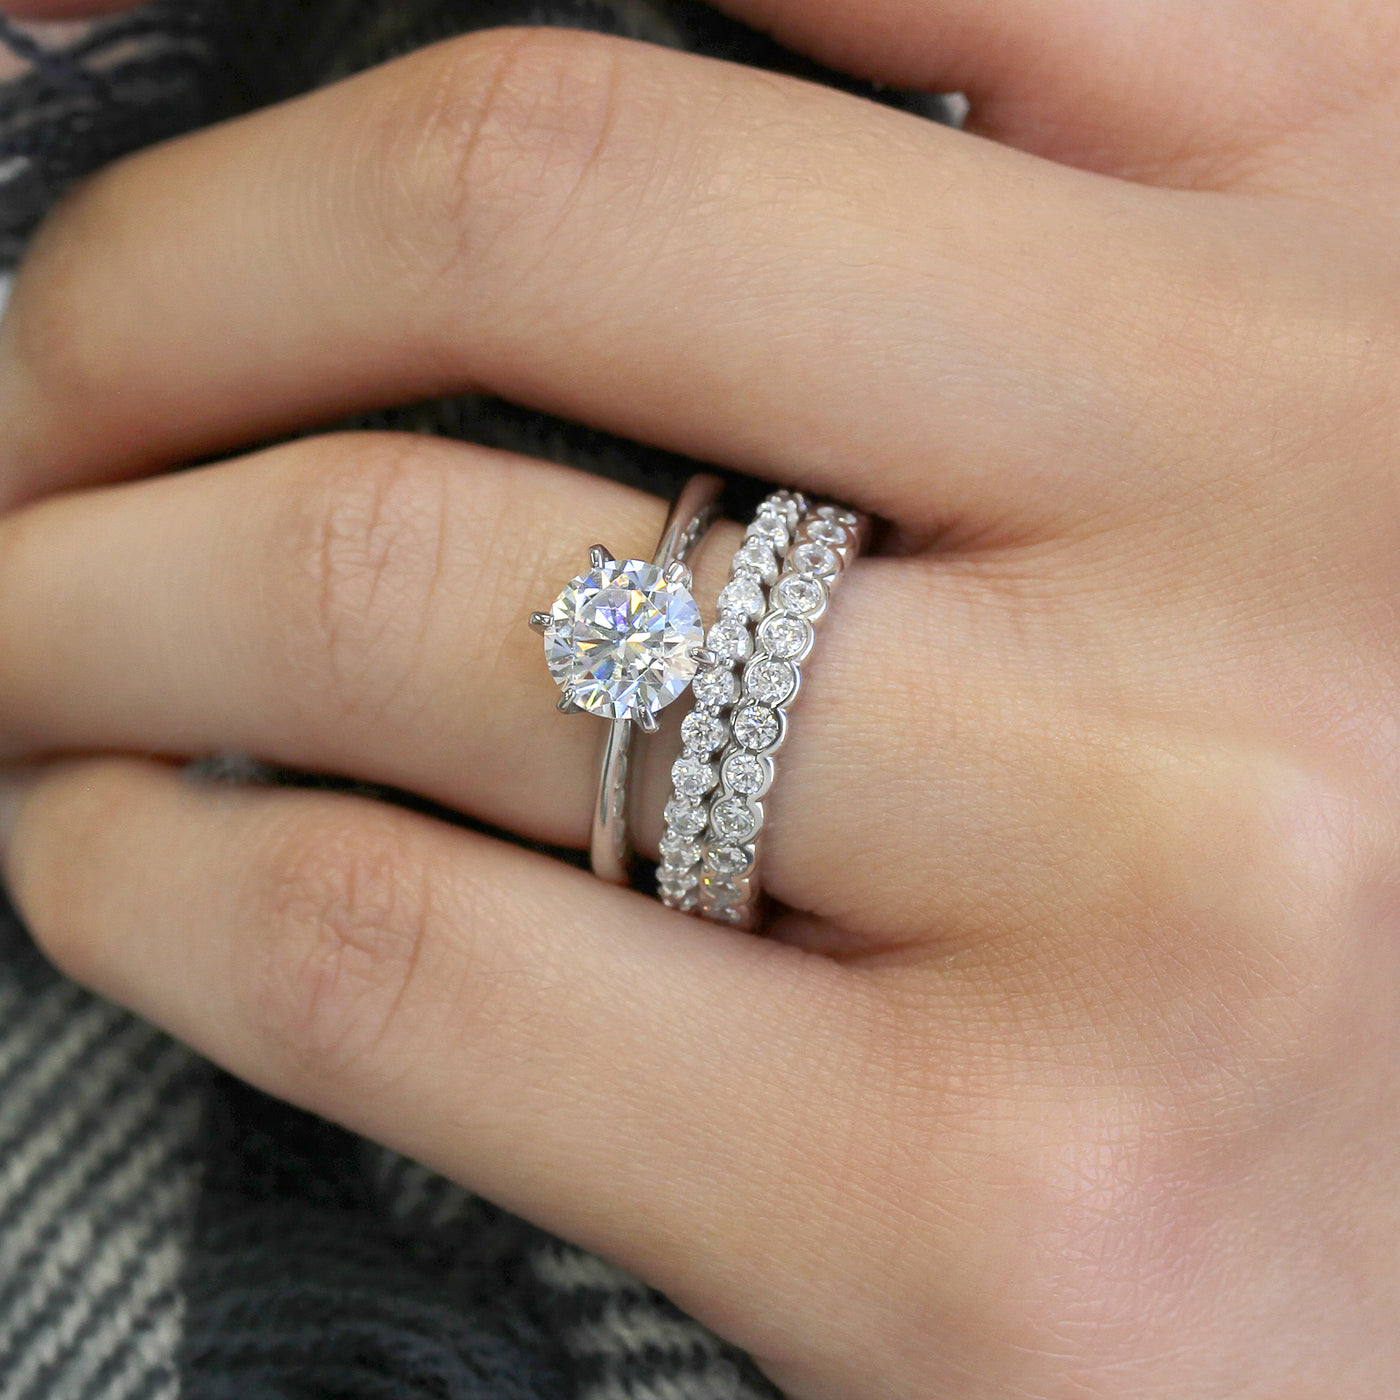 Custom Stackable Rings, Sterling Silver 1.5 CT Simulated Diamond Solitaire, Eternity Bands